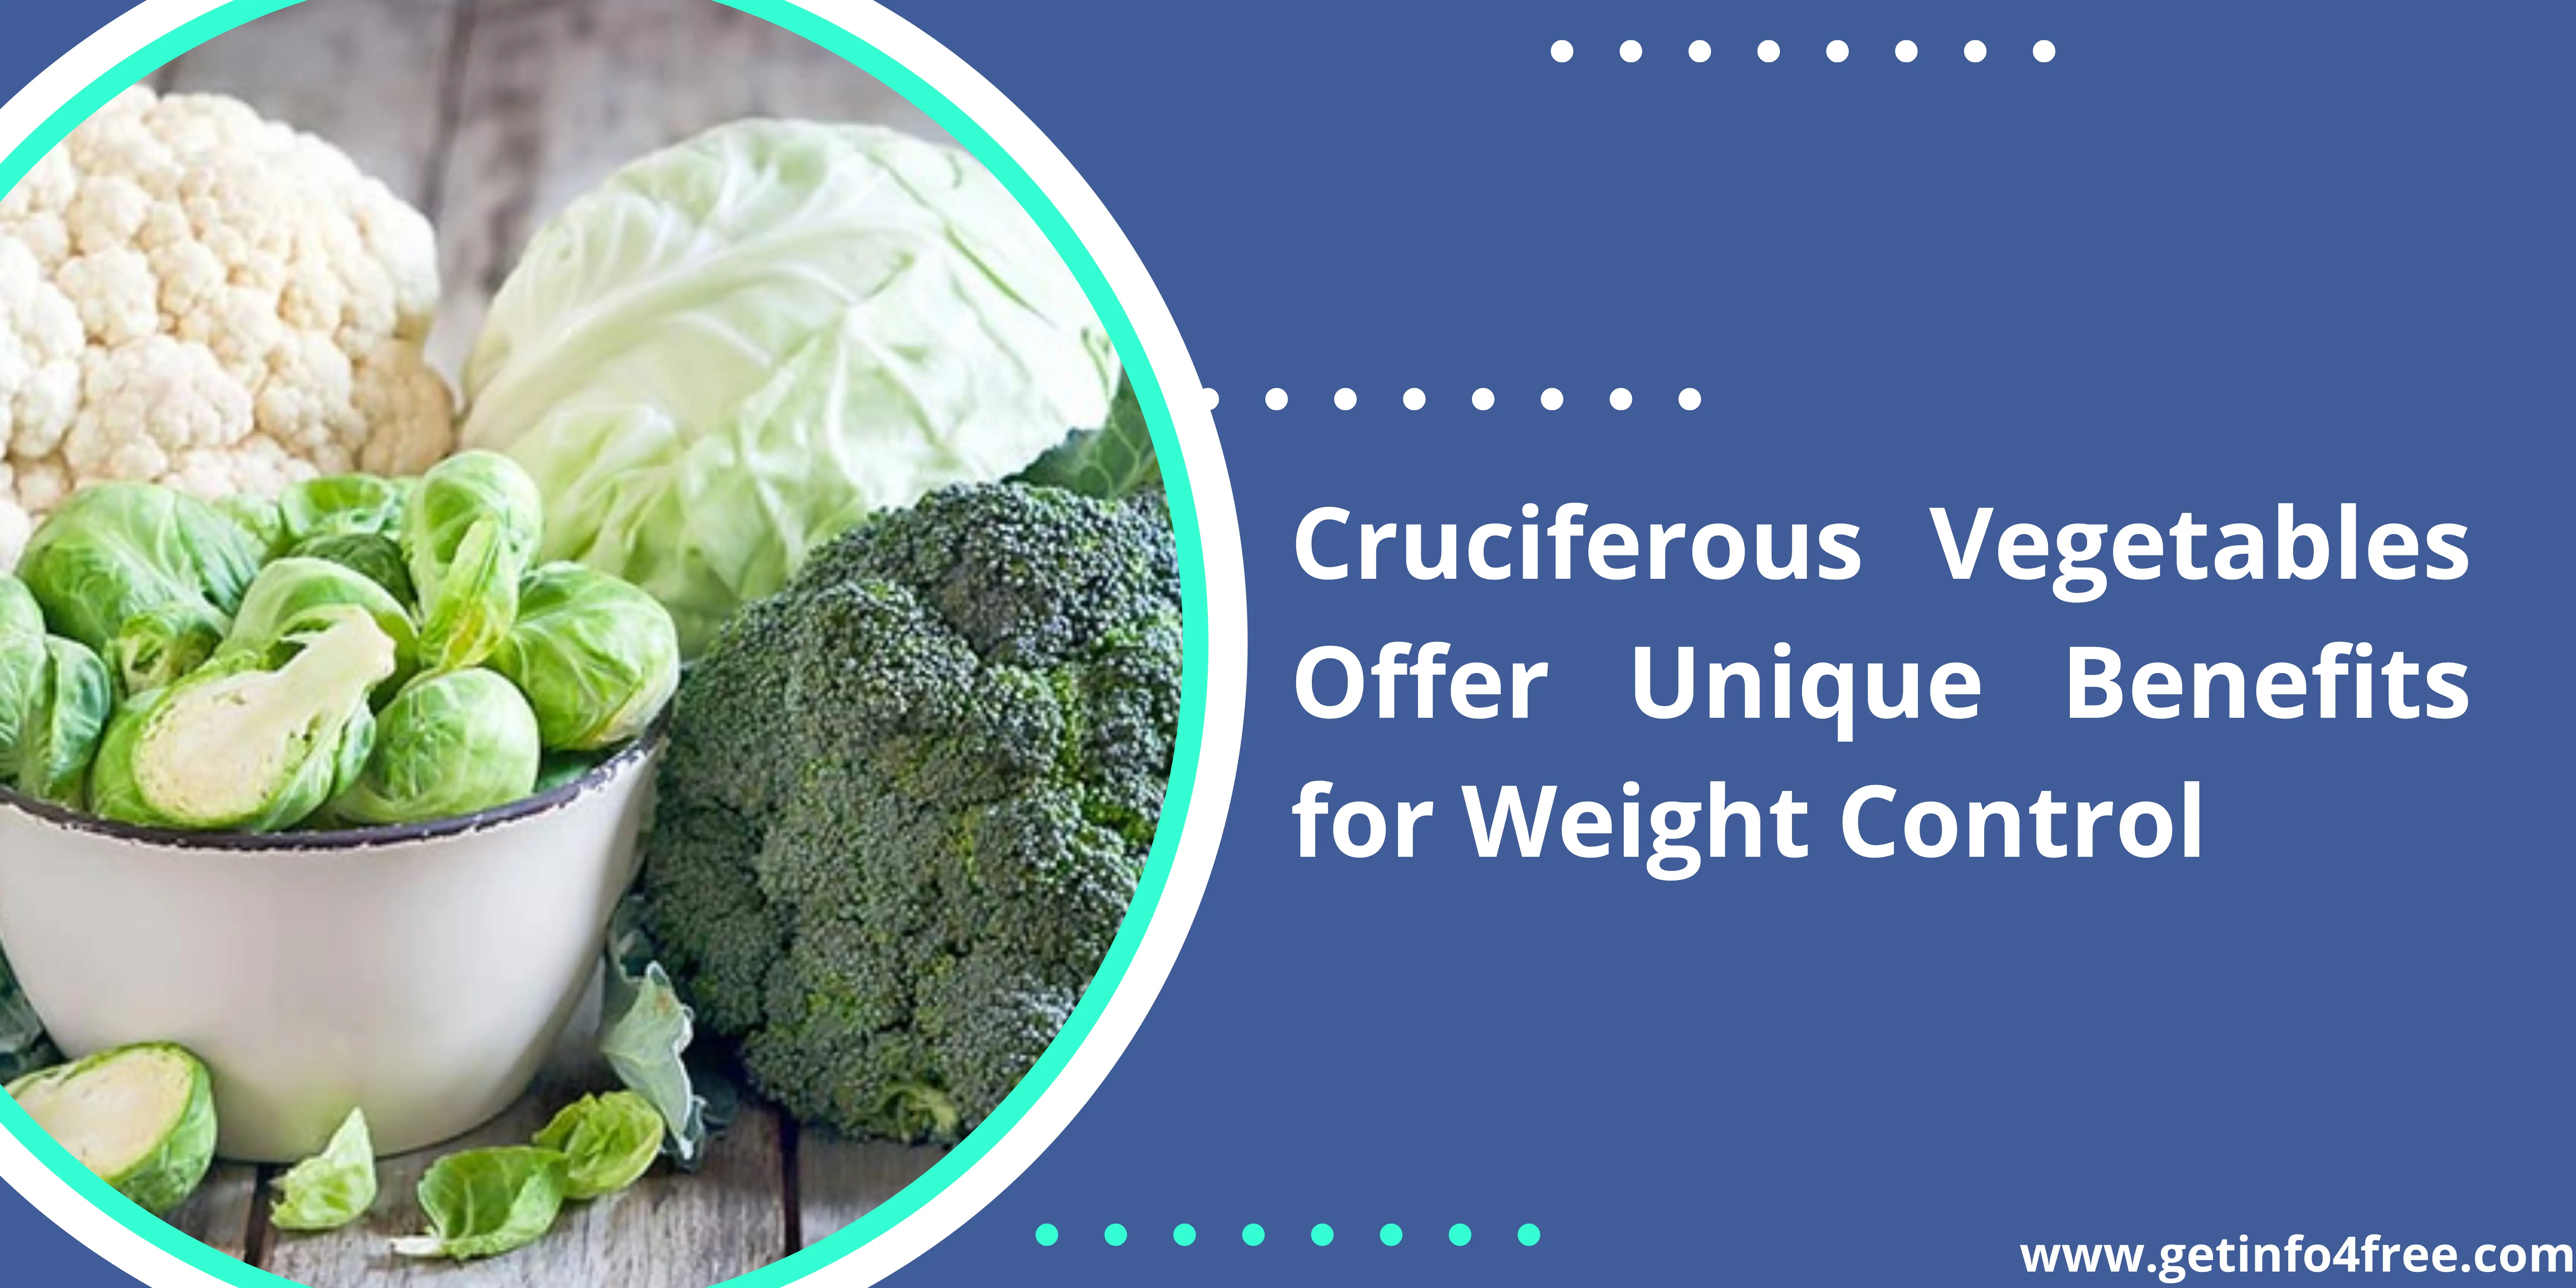 Cruciferous Vegetables Offer Unique Benefits for Weight Control